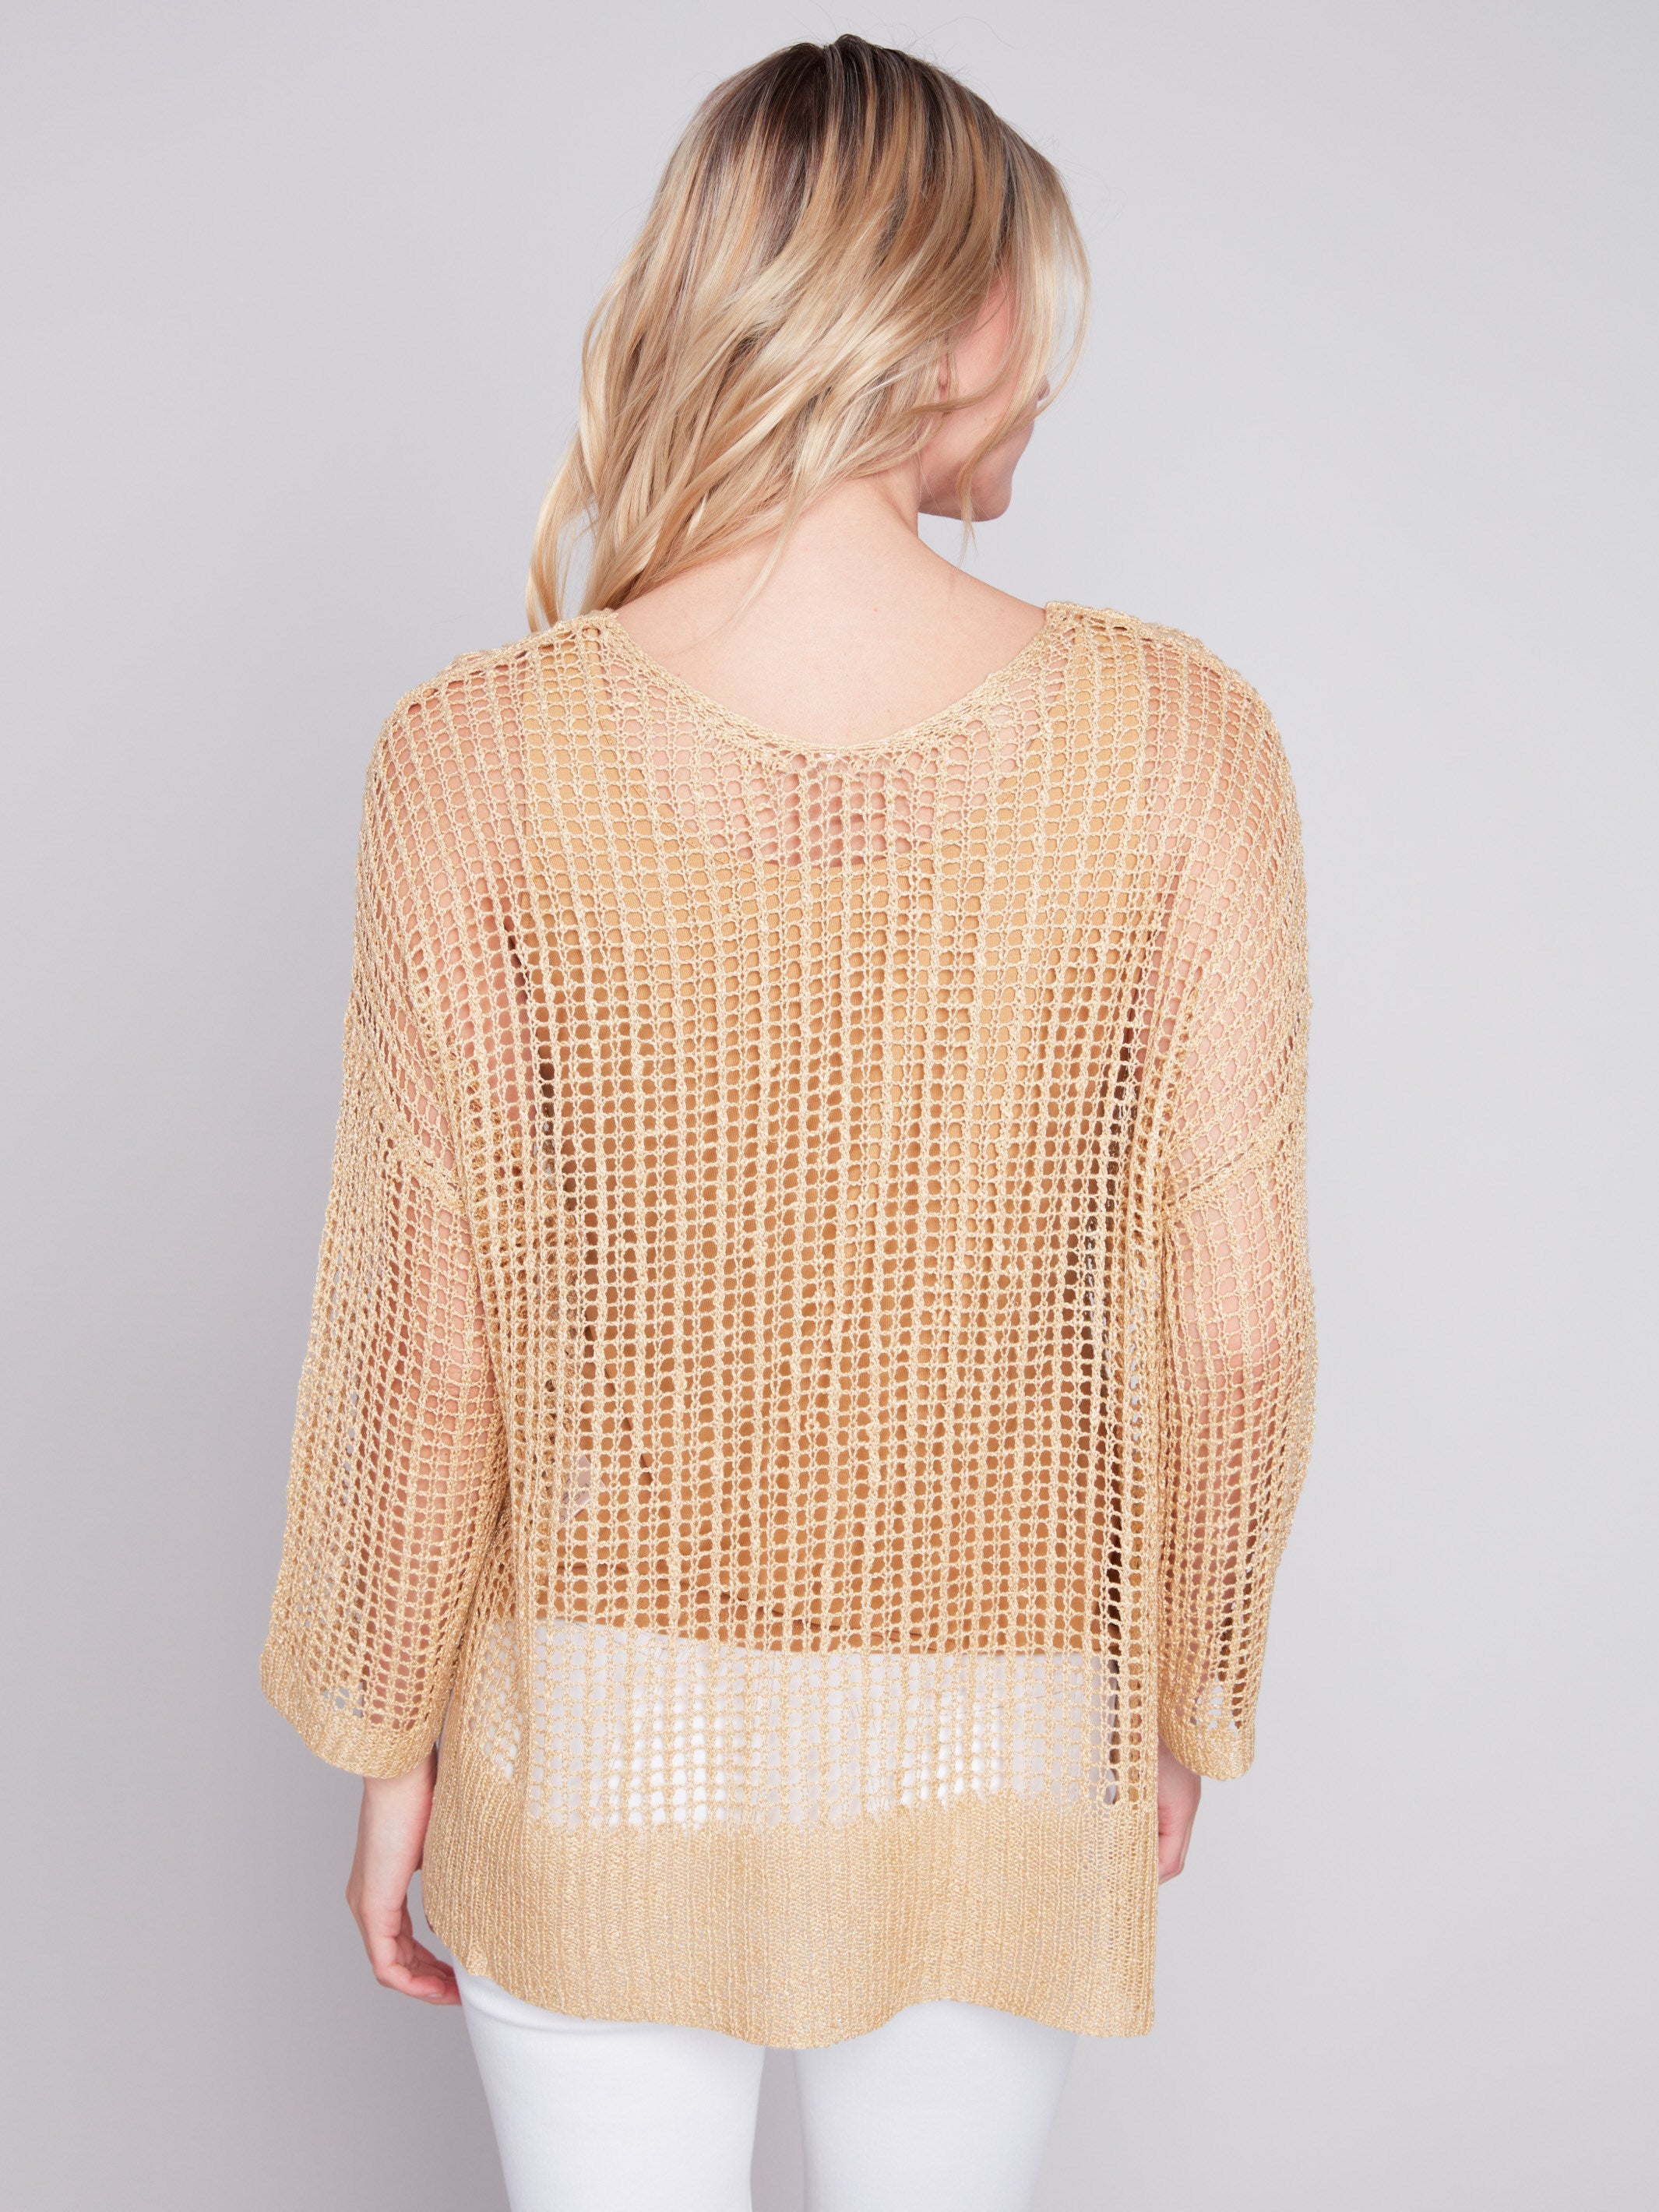 Fishnet Crochet Sweater - Gold - Charlie B Collection Canada - Image 2